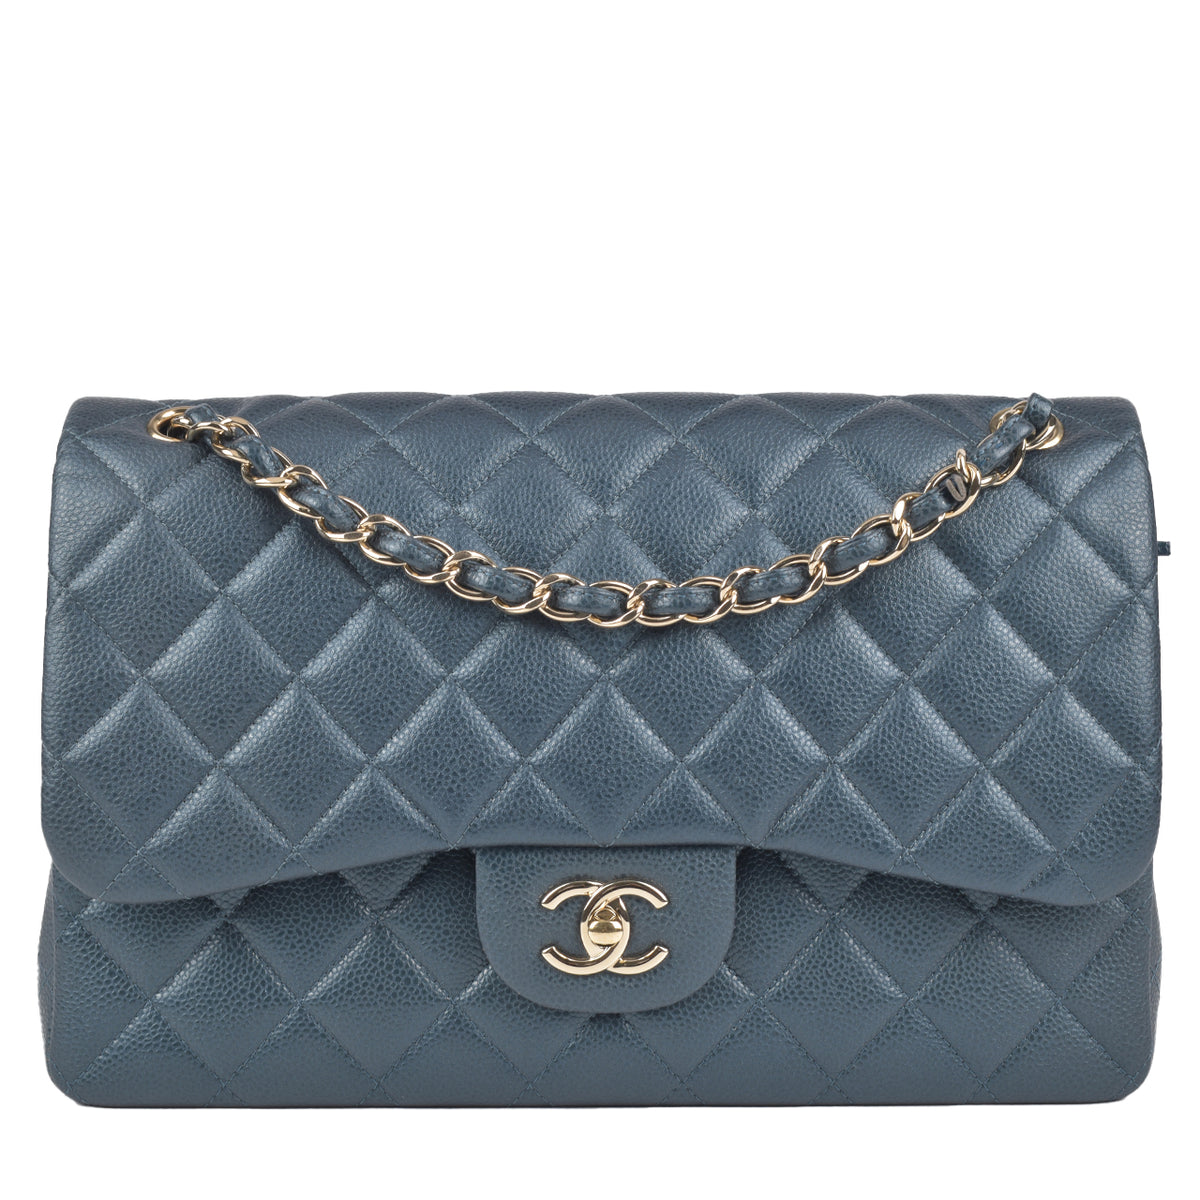 New 22B CHANEL Blue LARGE Shopping Deauville Tote Pouch Bag MICROCHIP